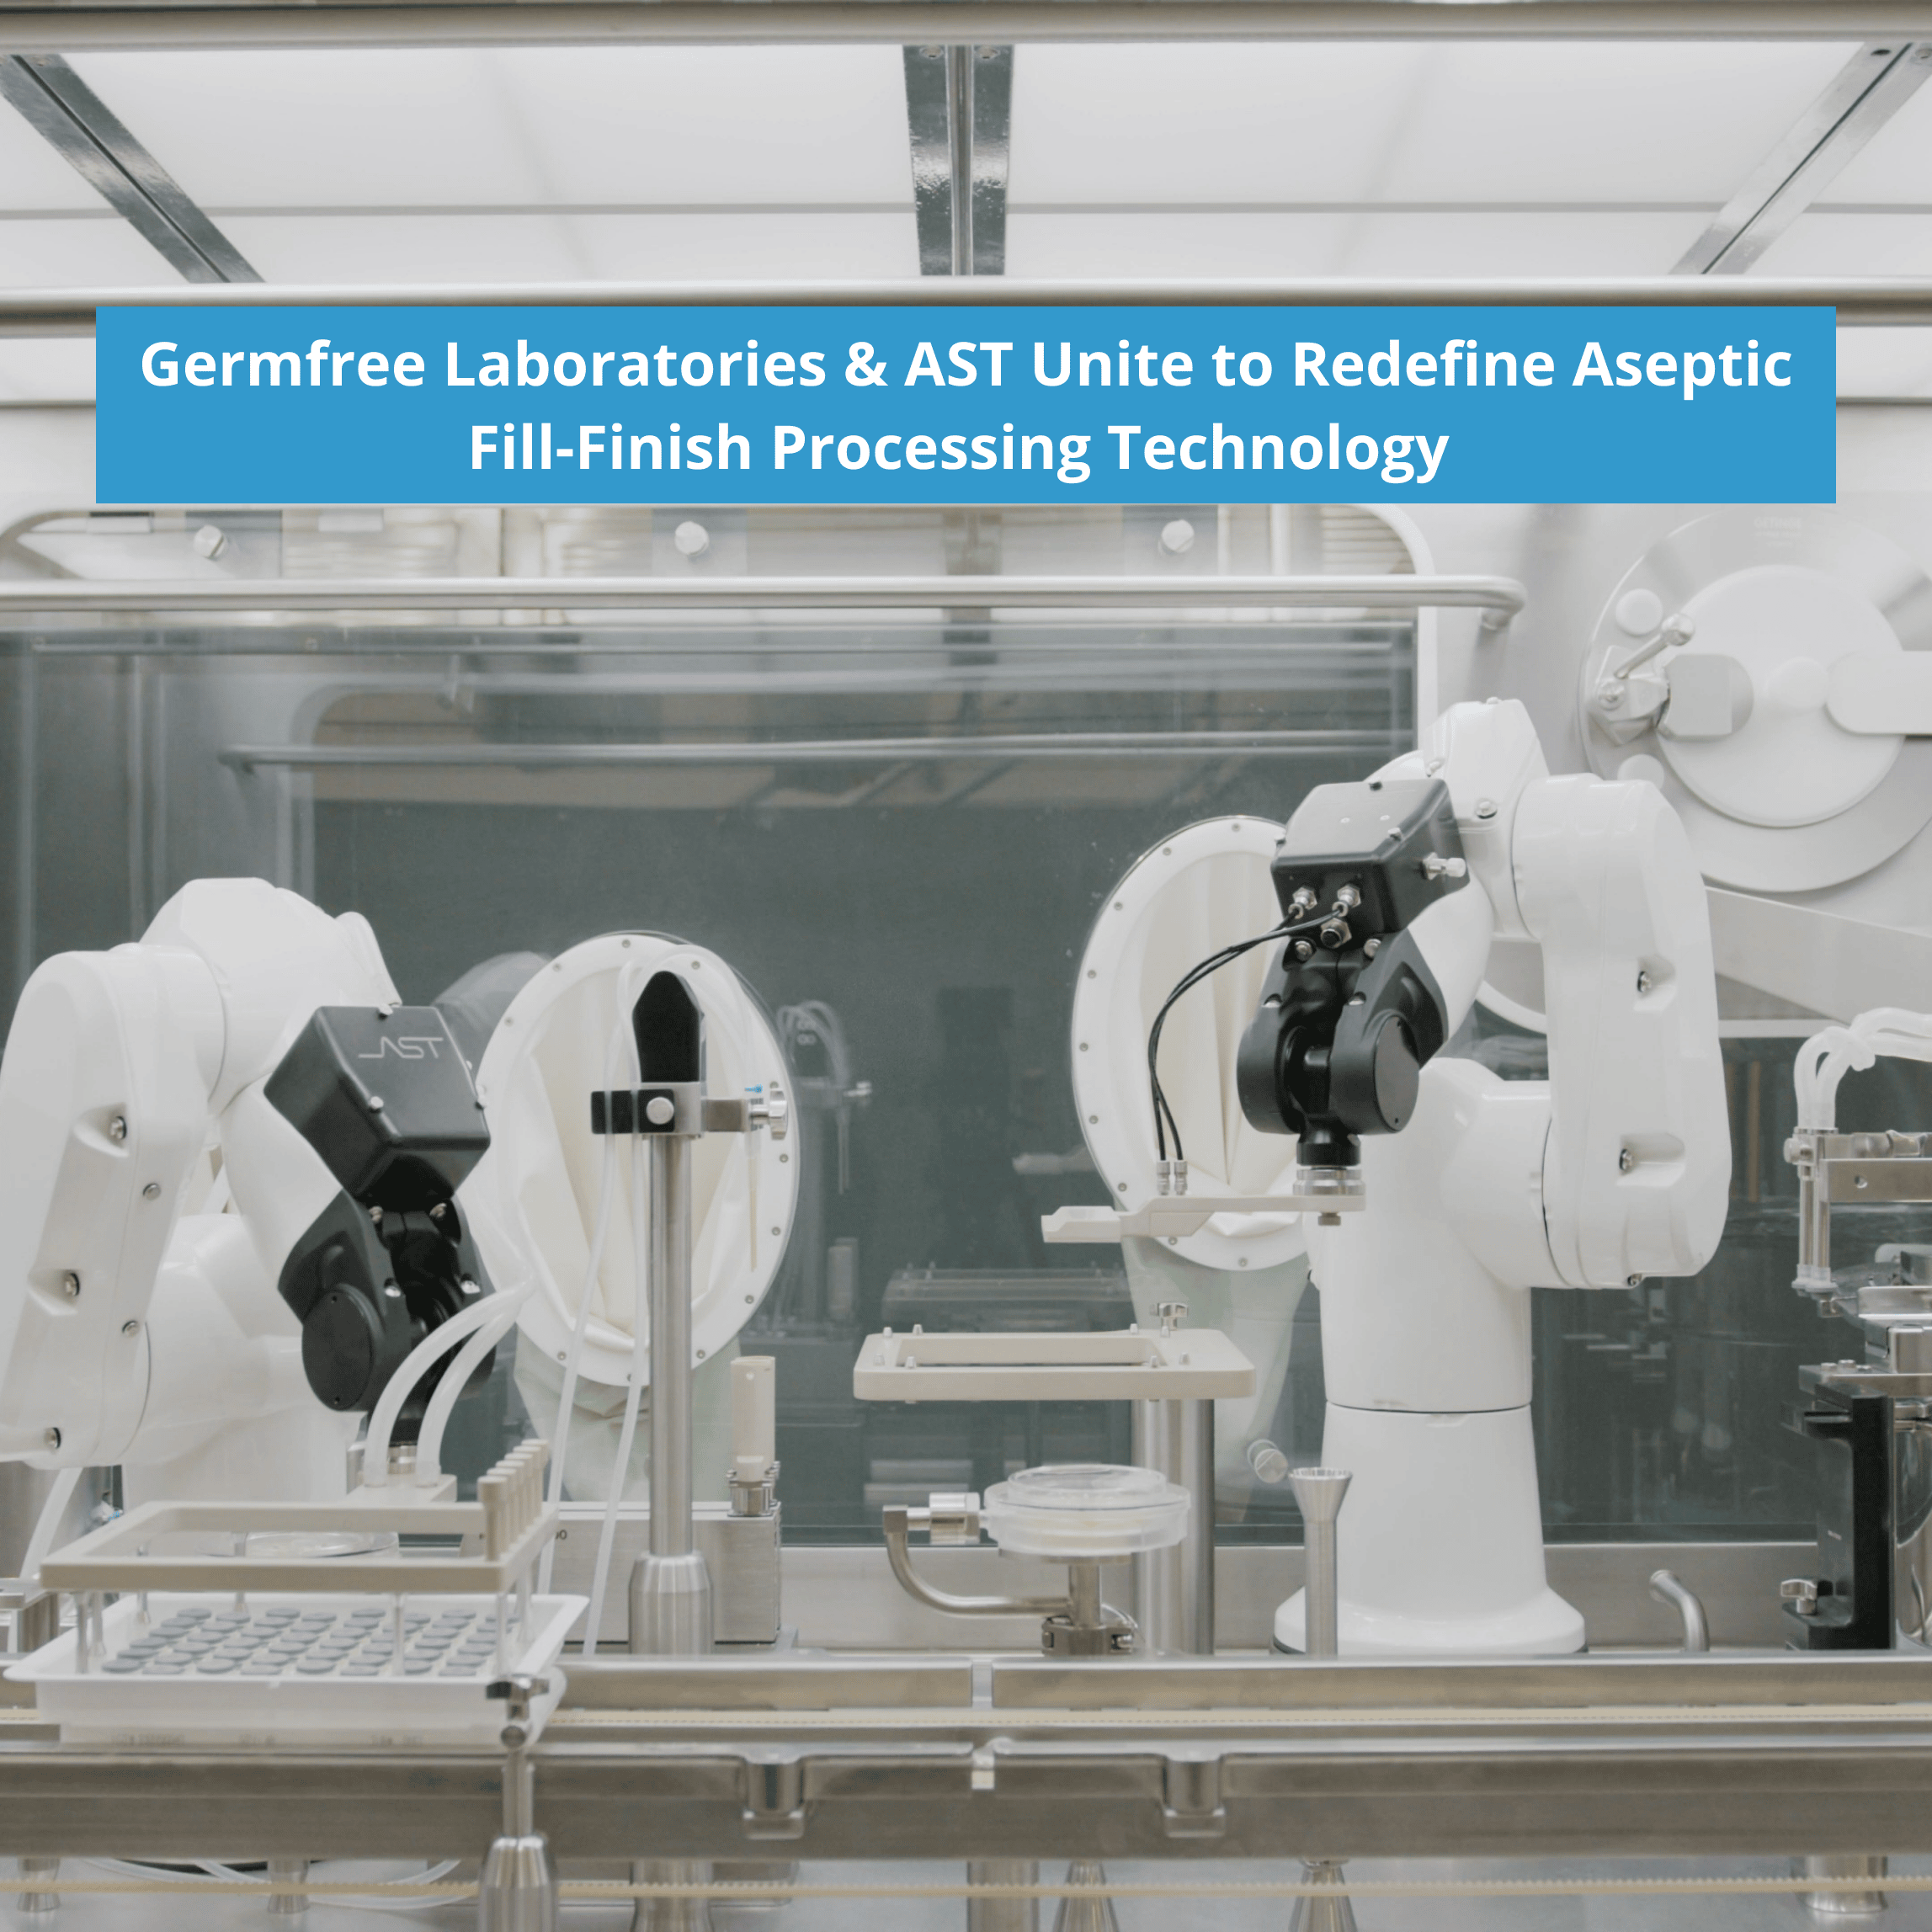 Germfree Laboratories and AST Unite to Redefine Aseptic Fill-Finish Processing Technology